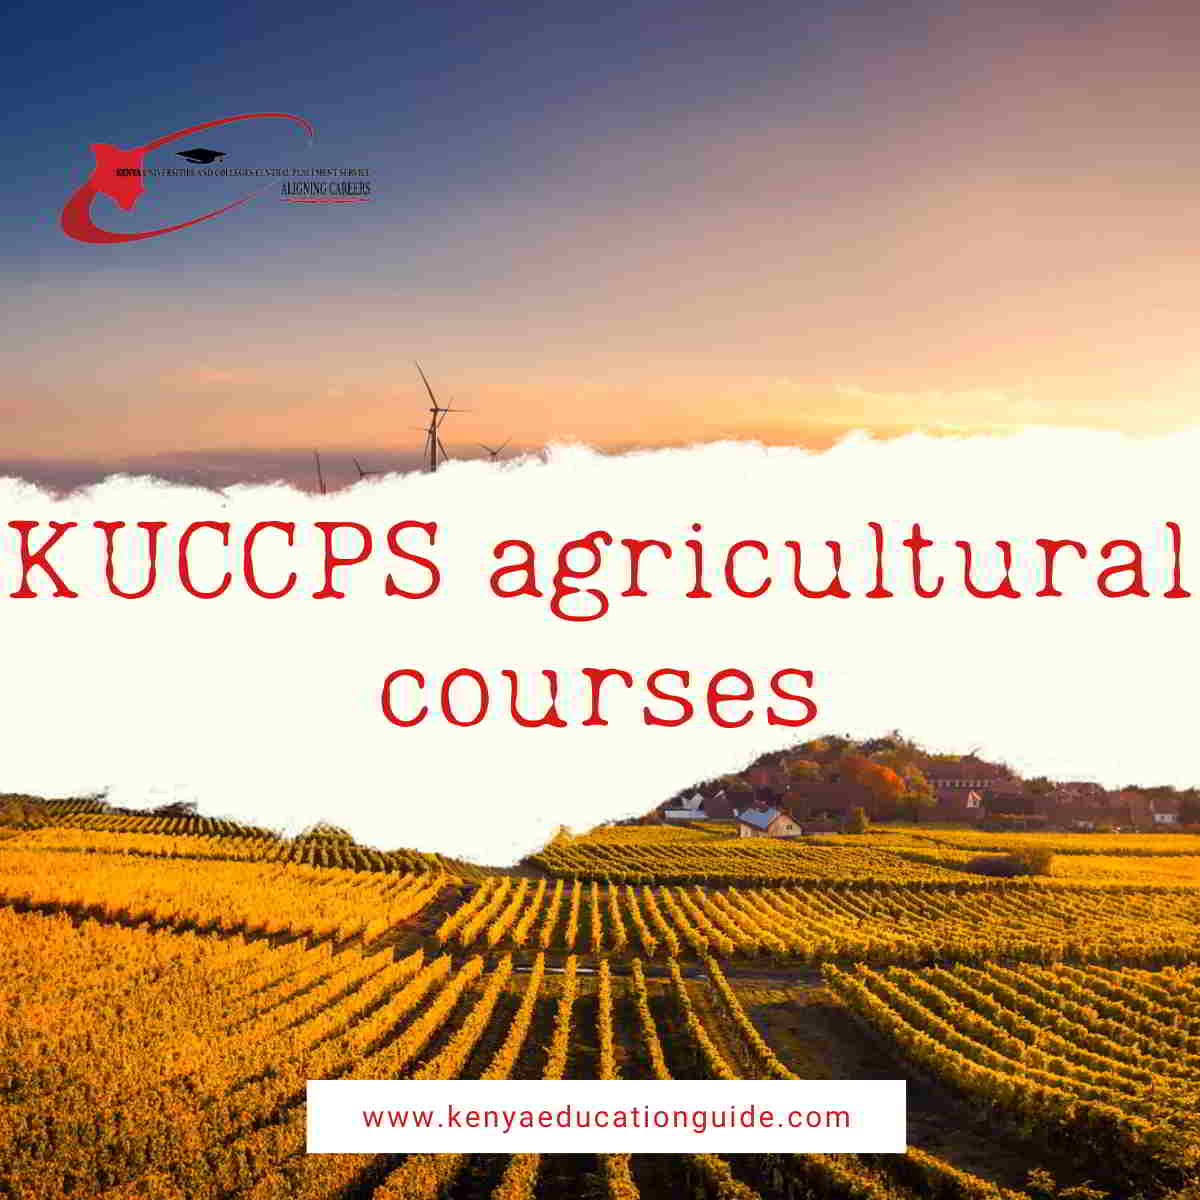 KUCCPS agricultural courses